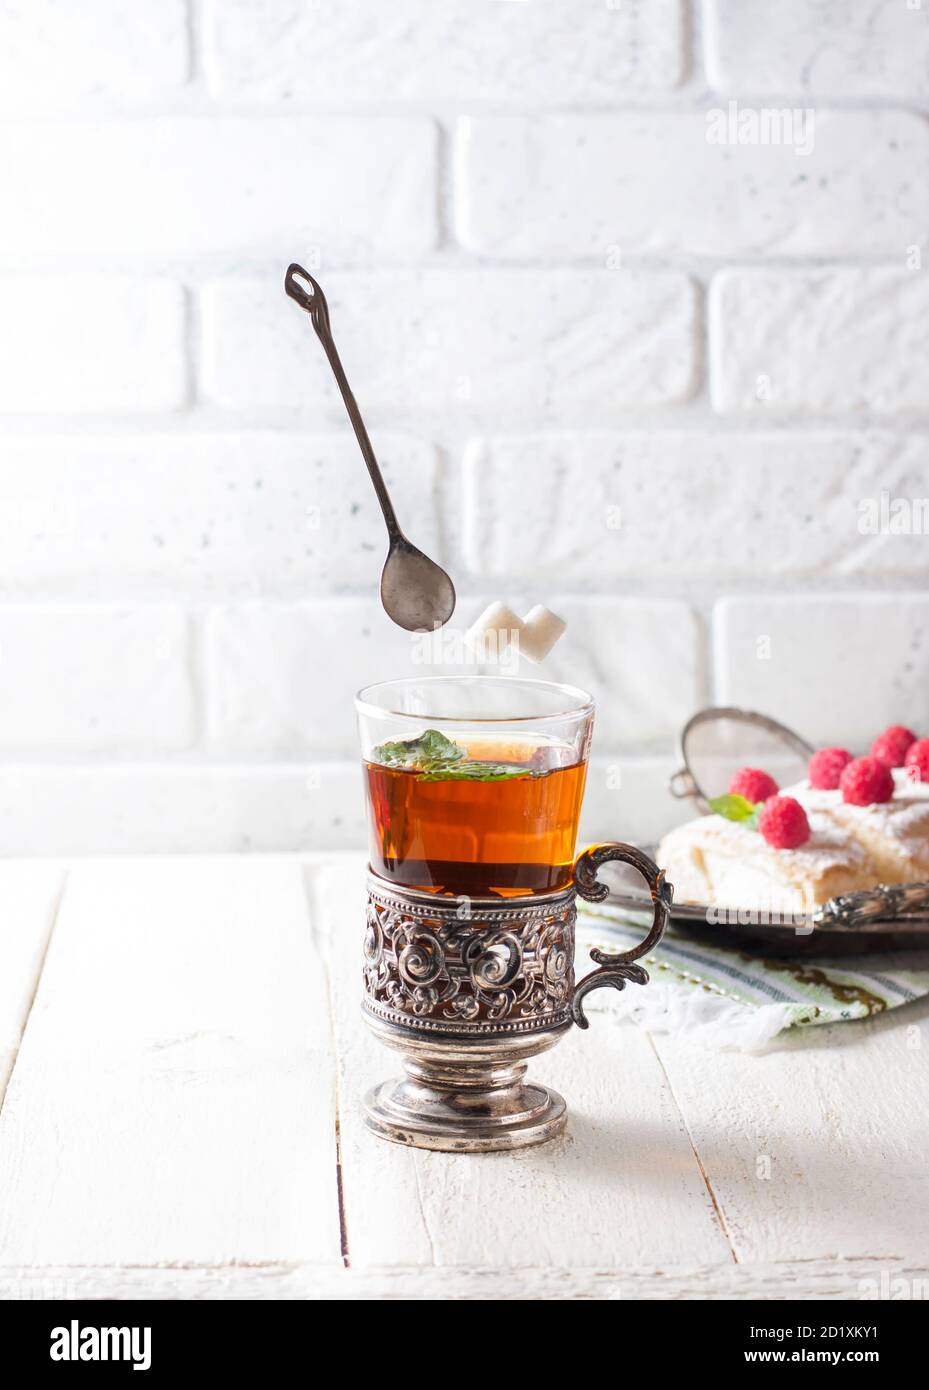 Tea on a light background and ingredients flying in the air, sugar,, spoon. Bursts, splashes. Vintage. Stock Photo